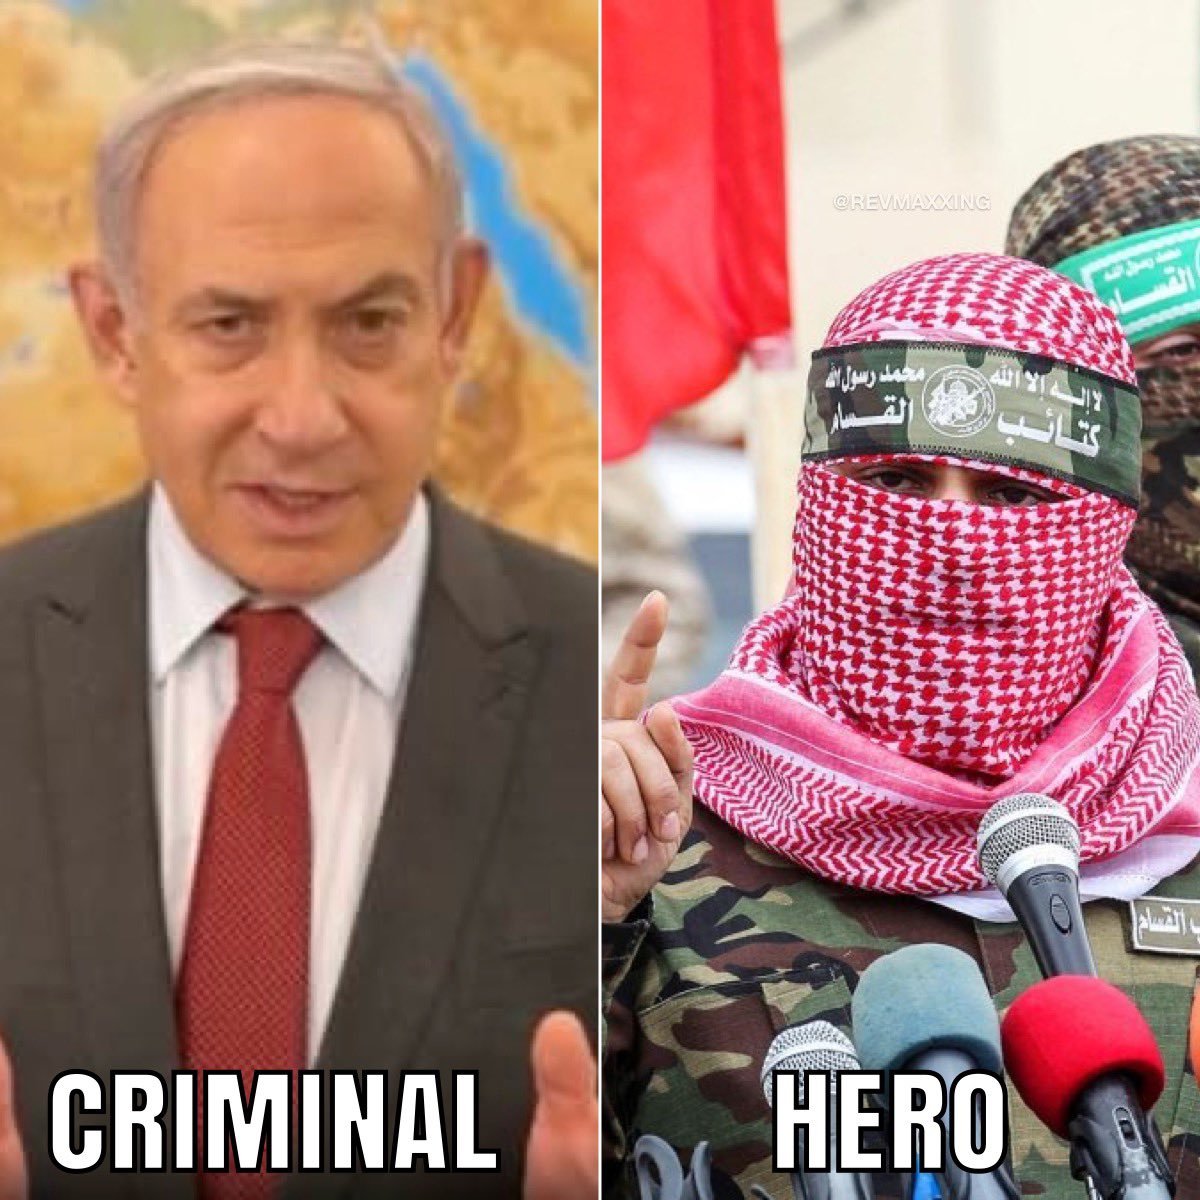 Which one is your choice? I always choose heroes.💪🇵🇸